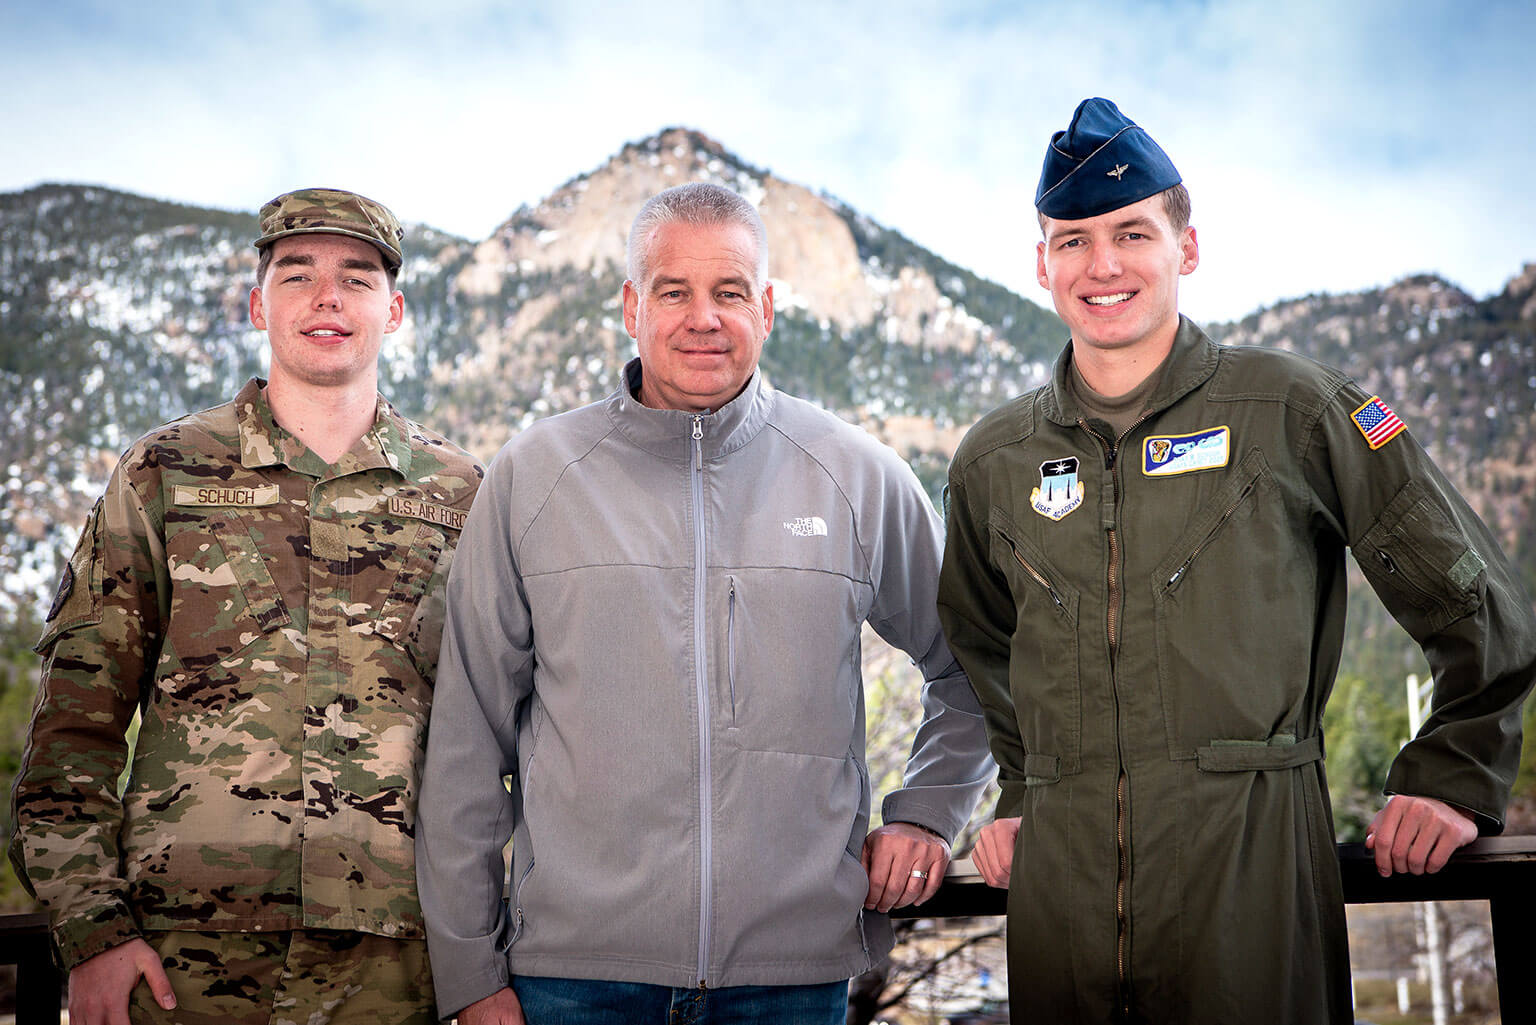 Cadet 4th Class Dylan Schuch and Cadet 2nd Class Chad Schuch Jr. pose with their father.